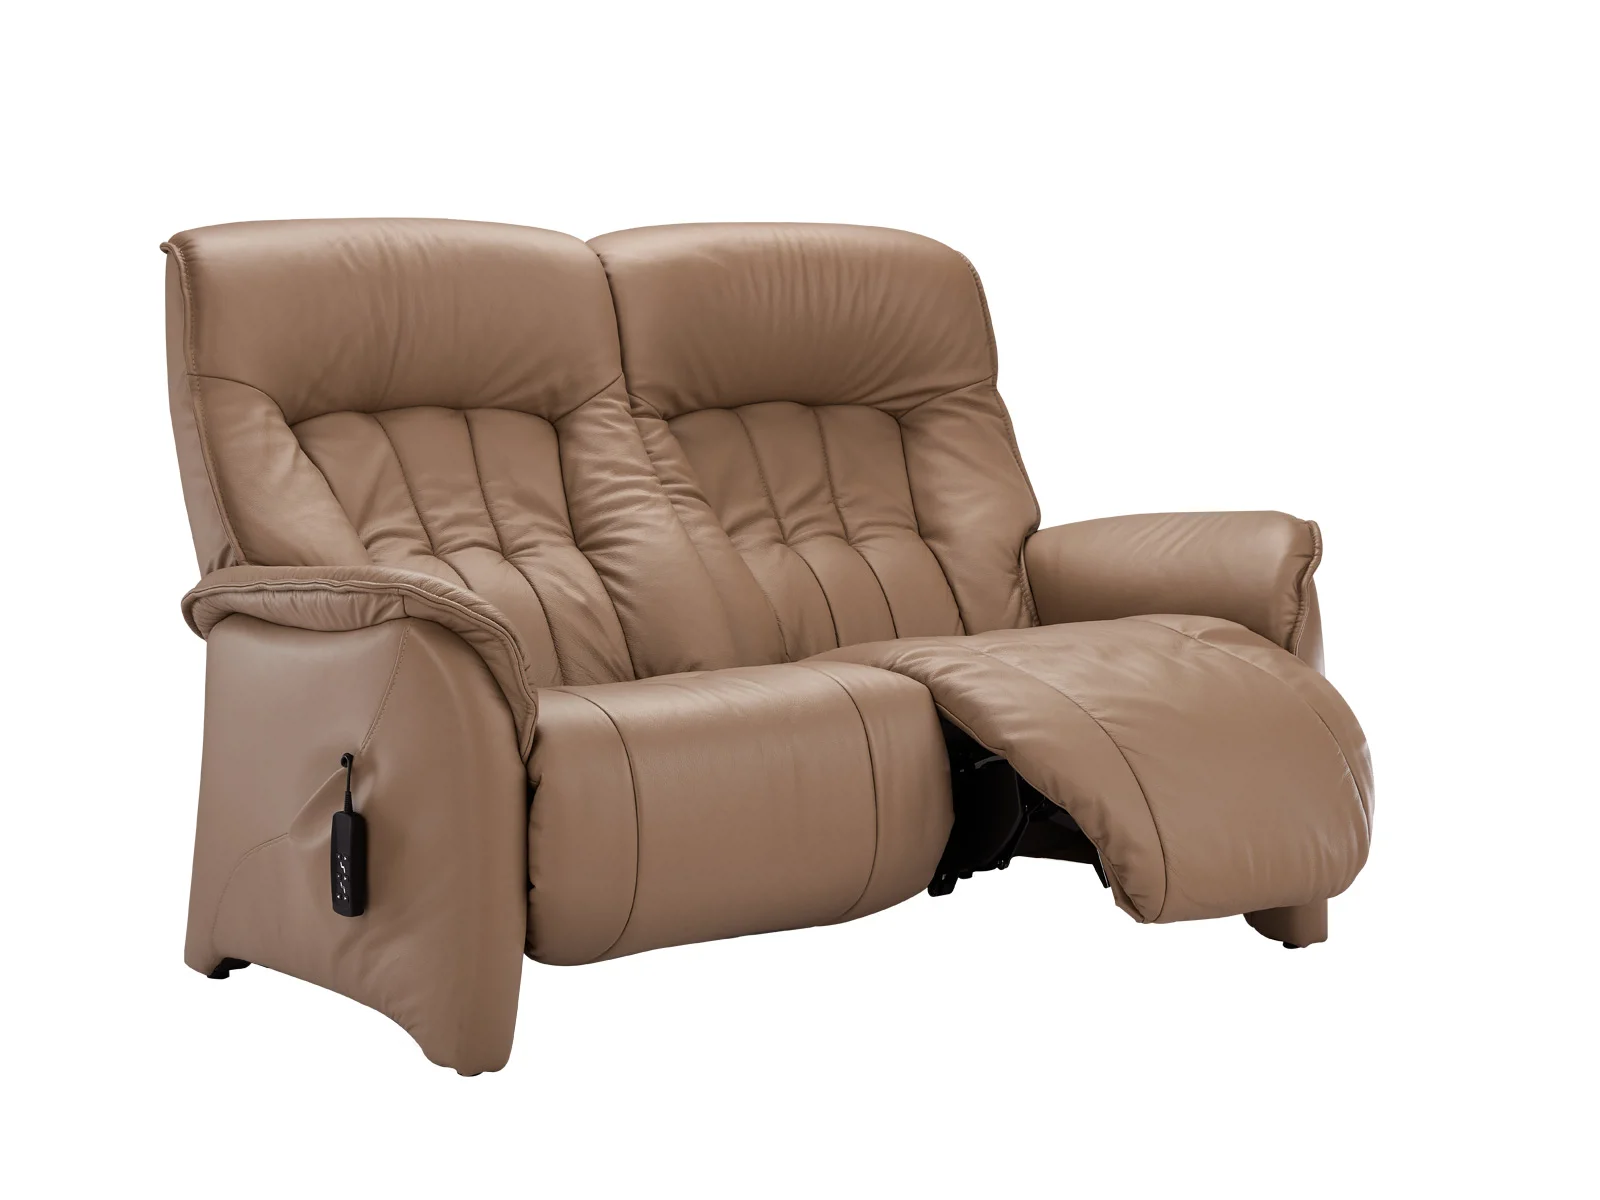 2 Seater Electric Recliner